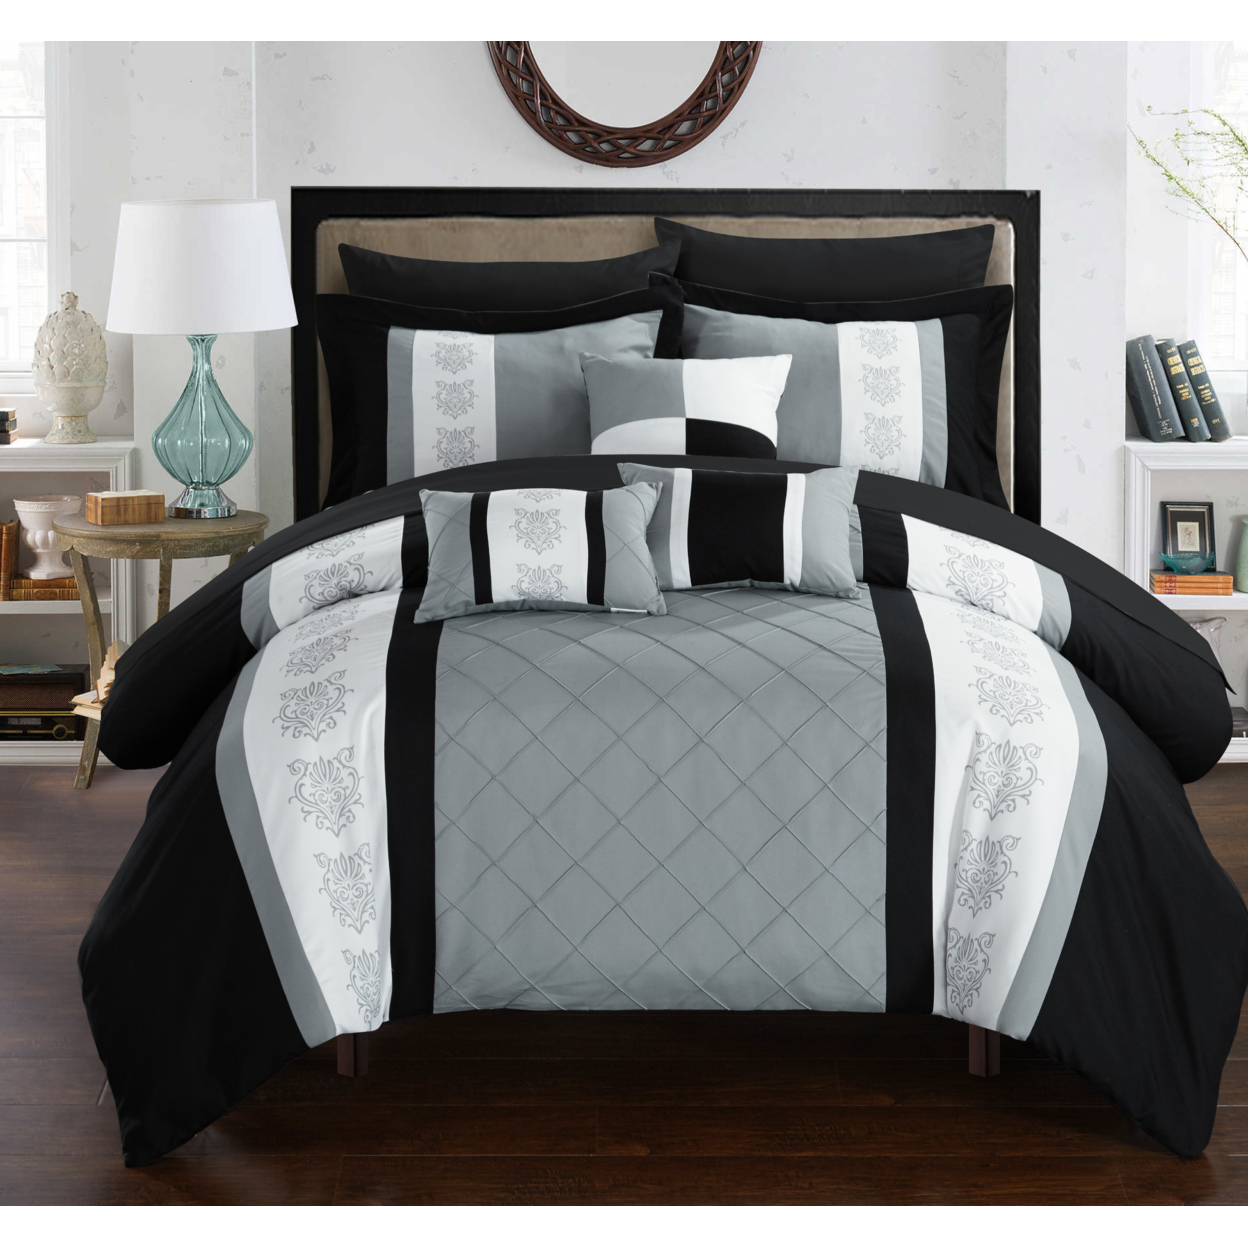 Chic Home 8/10 Piece Adam Pintuck Pieced Color Block Embroidery Bed In A Bag Comforter Set With Sheet Set - Grey, Queen